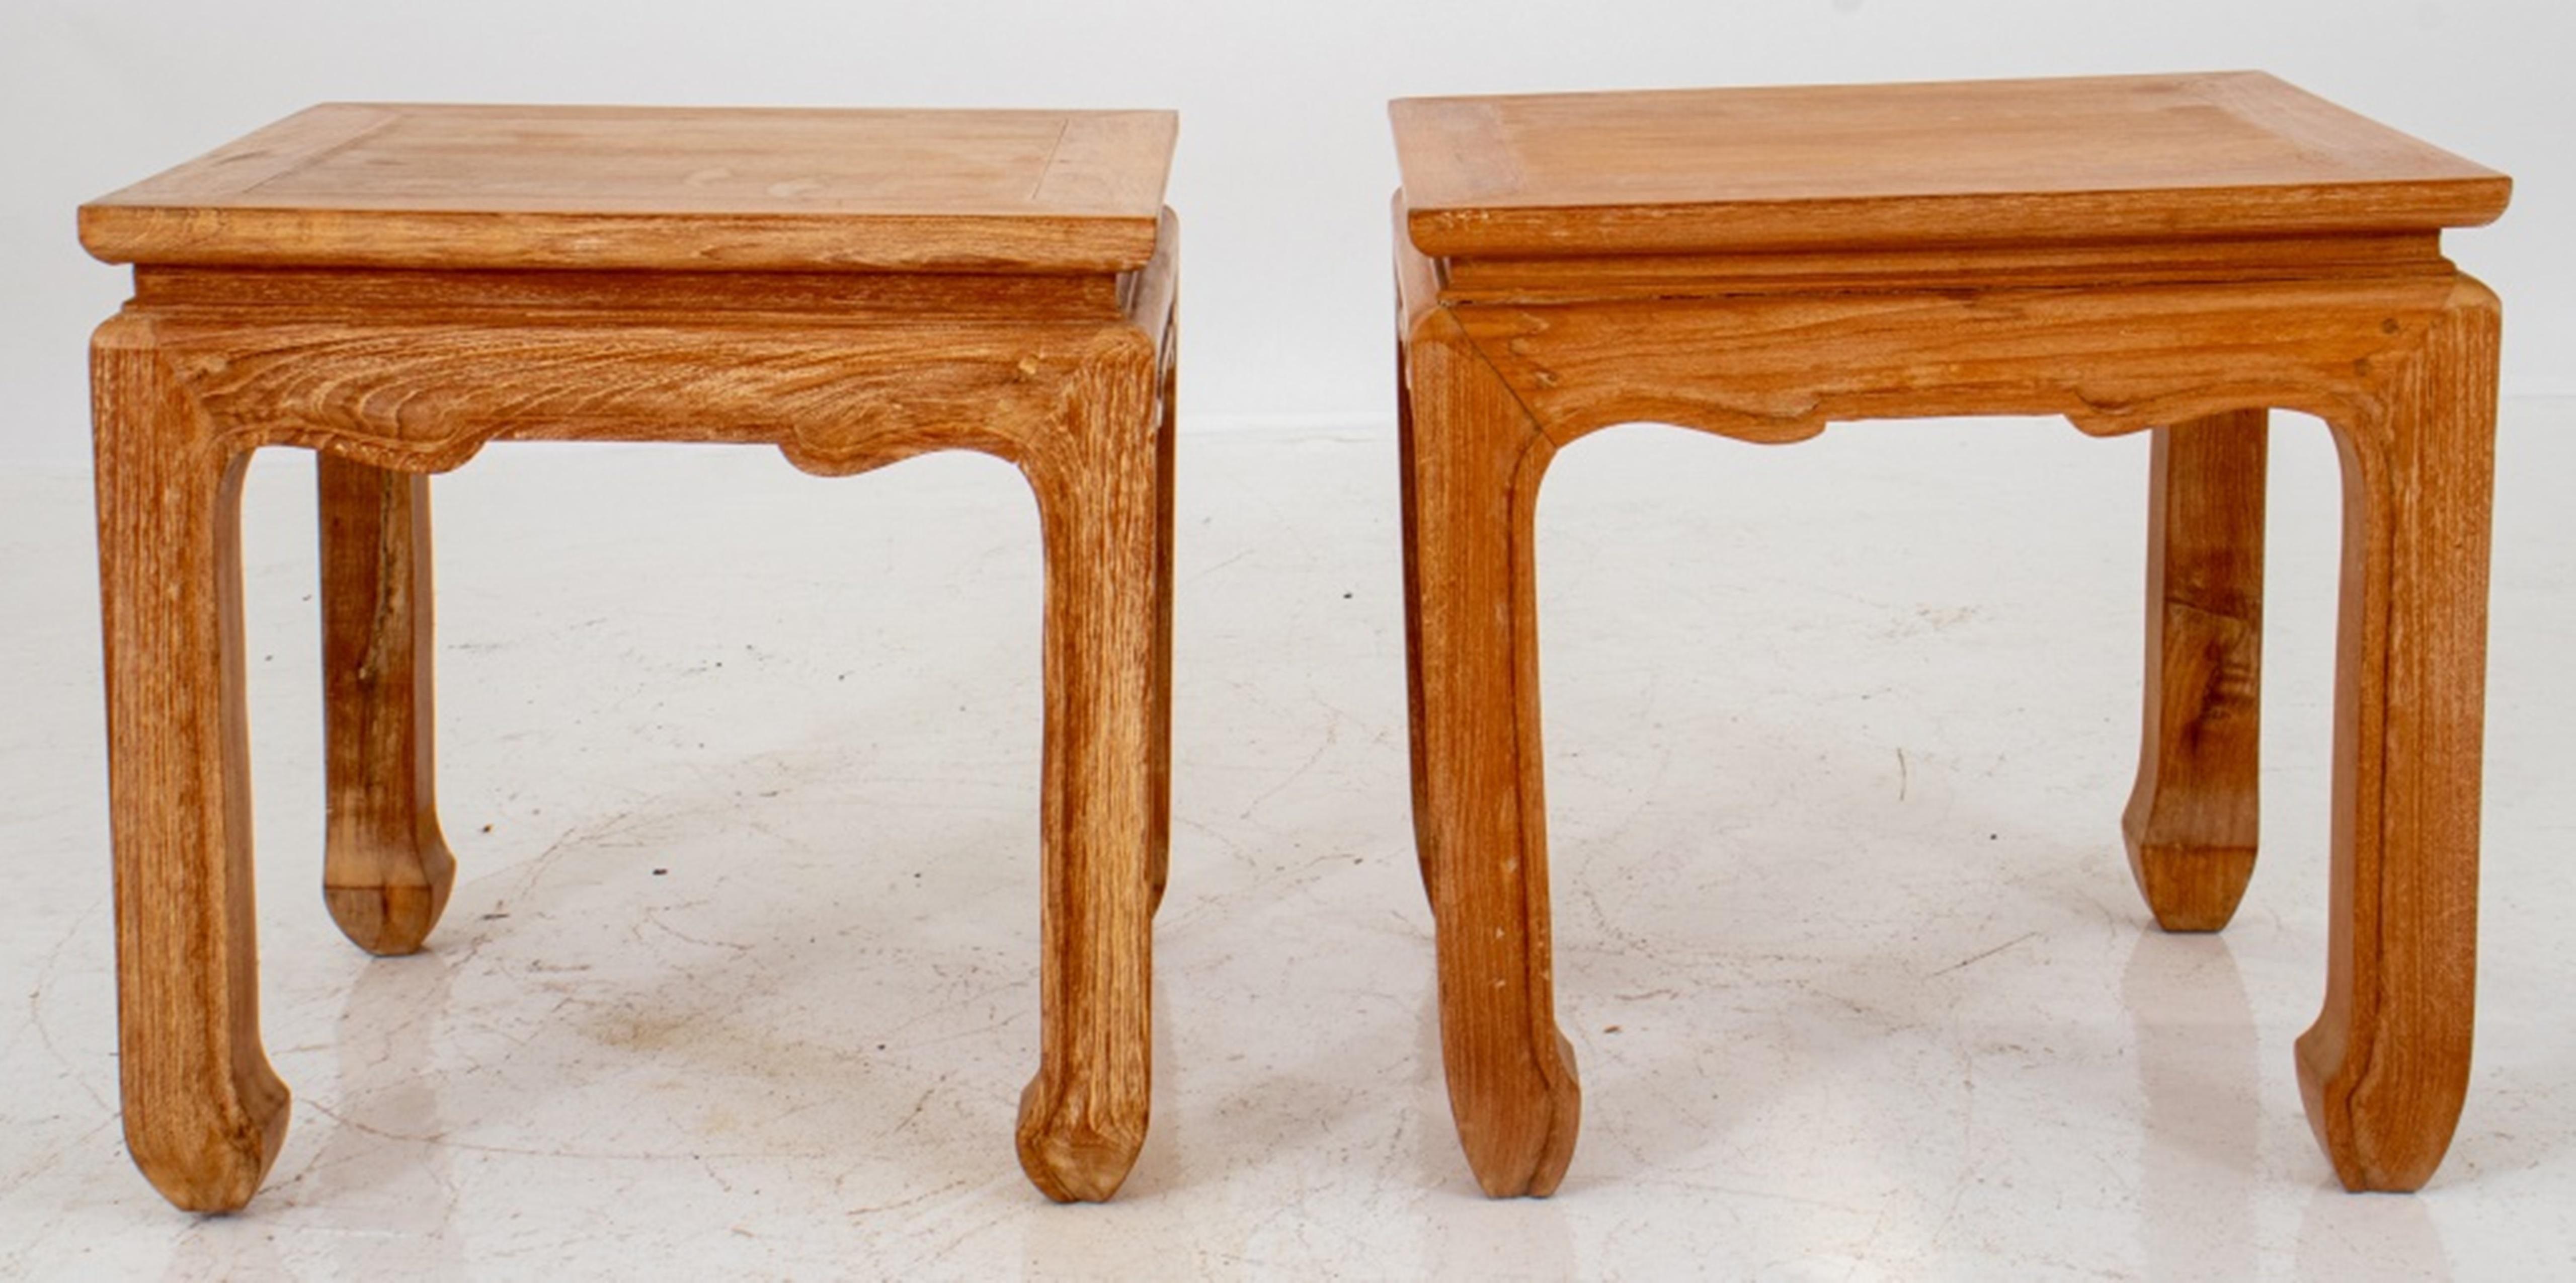 Chinese Qing style Cypress wood occasional tables, a pair (2), square, each in the manner of Qing period waisted corner-leg stools in the Changfangdeng form. Dimensions: 20